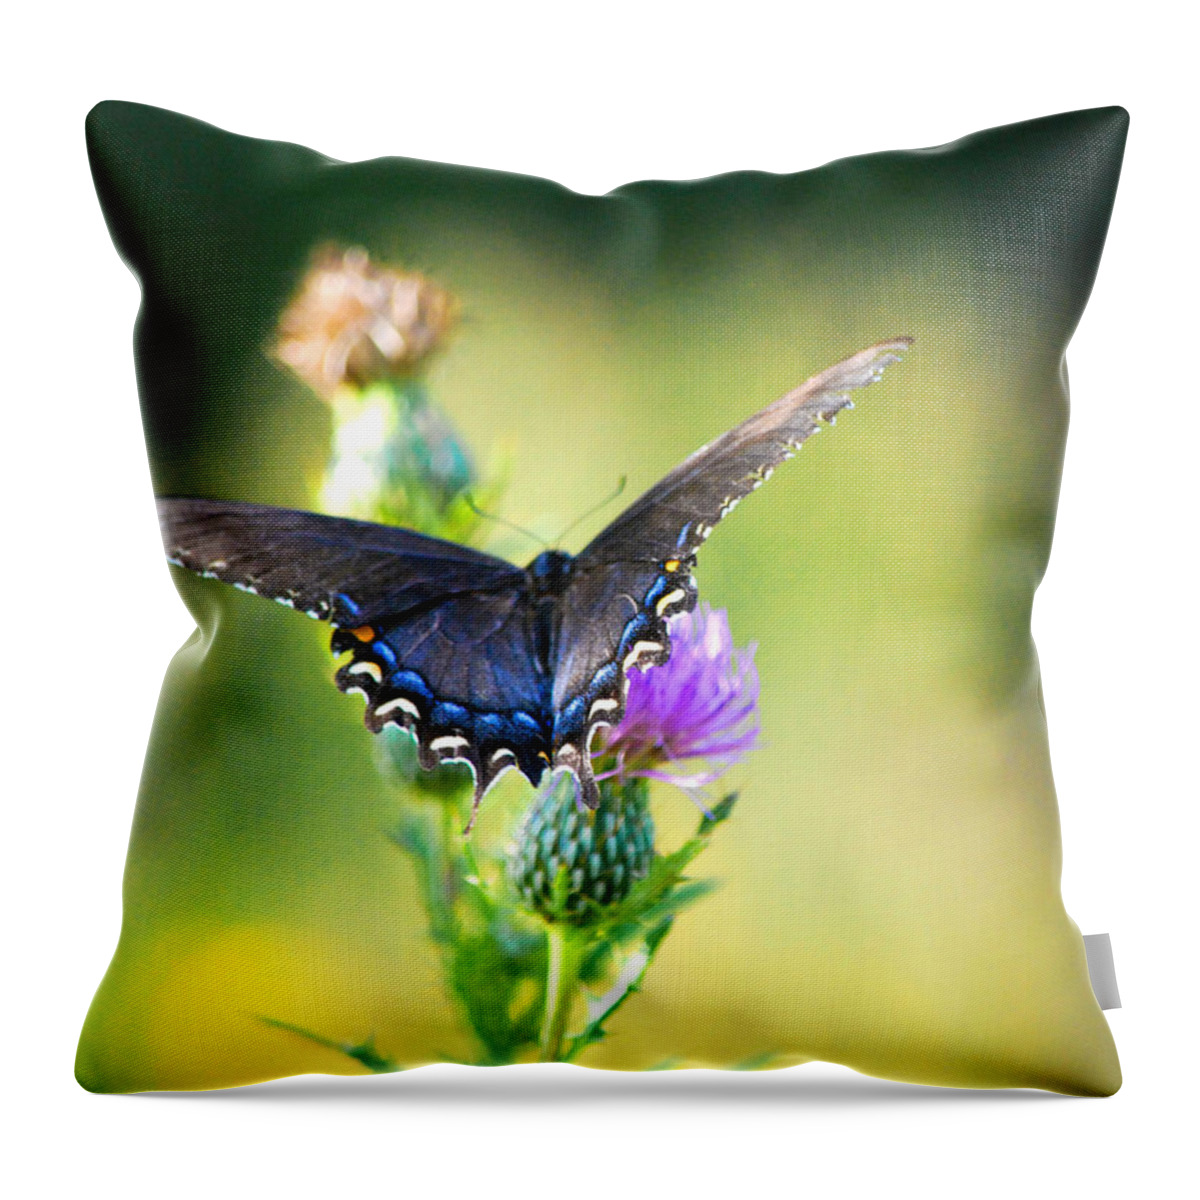 Butterfly Throw Pillow featuring the photograph Resting by Linda Segerson